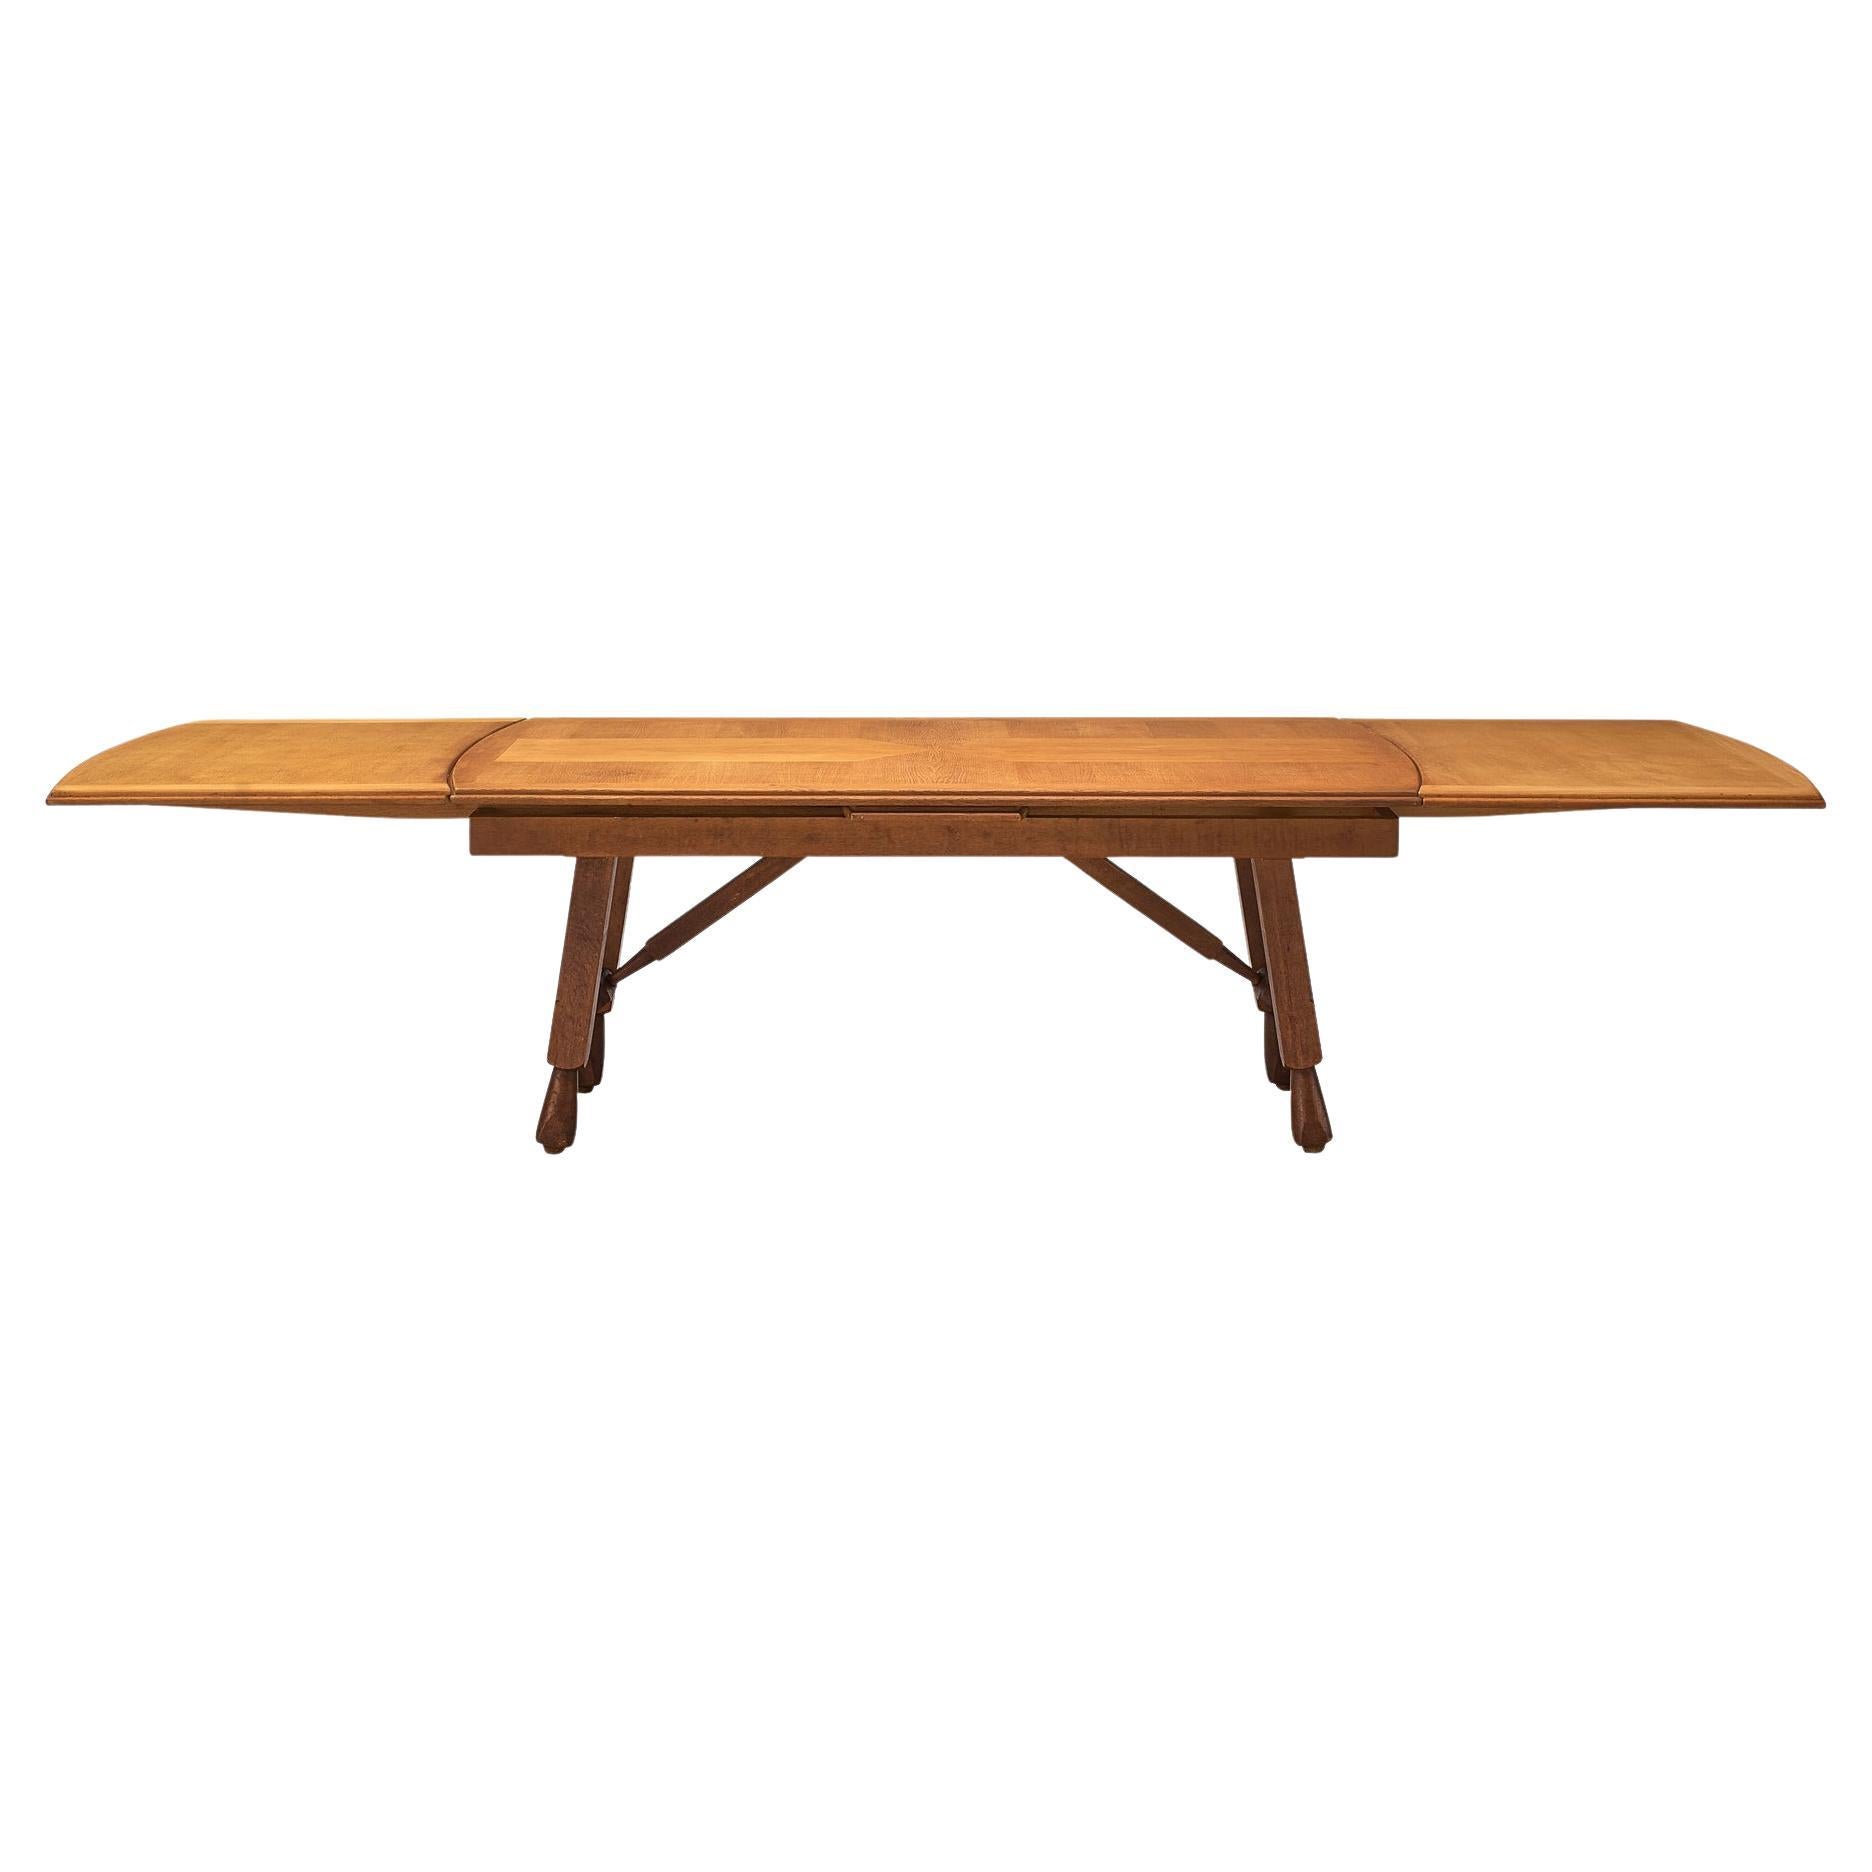 Guillerme & Chambron 'Pétrouille' Dining Table in Oak